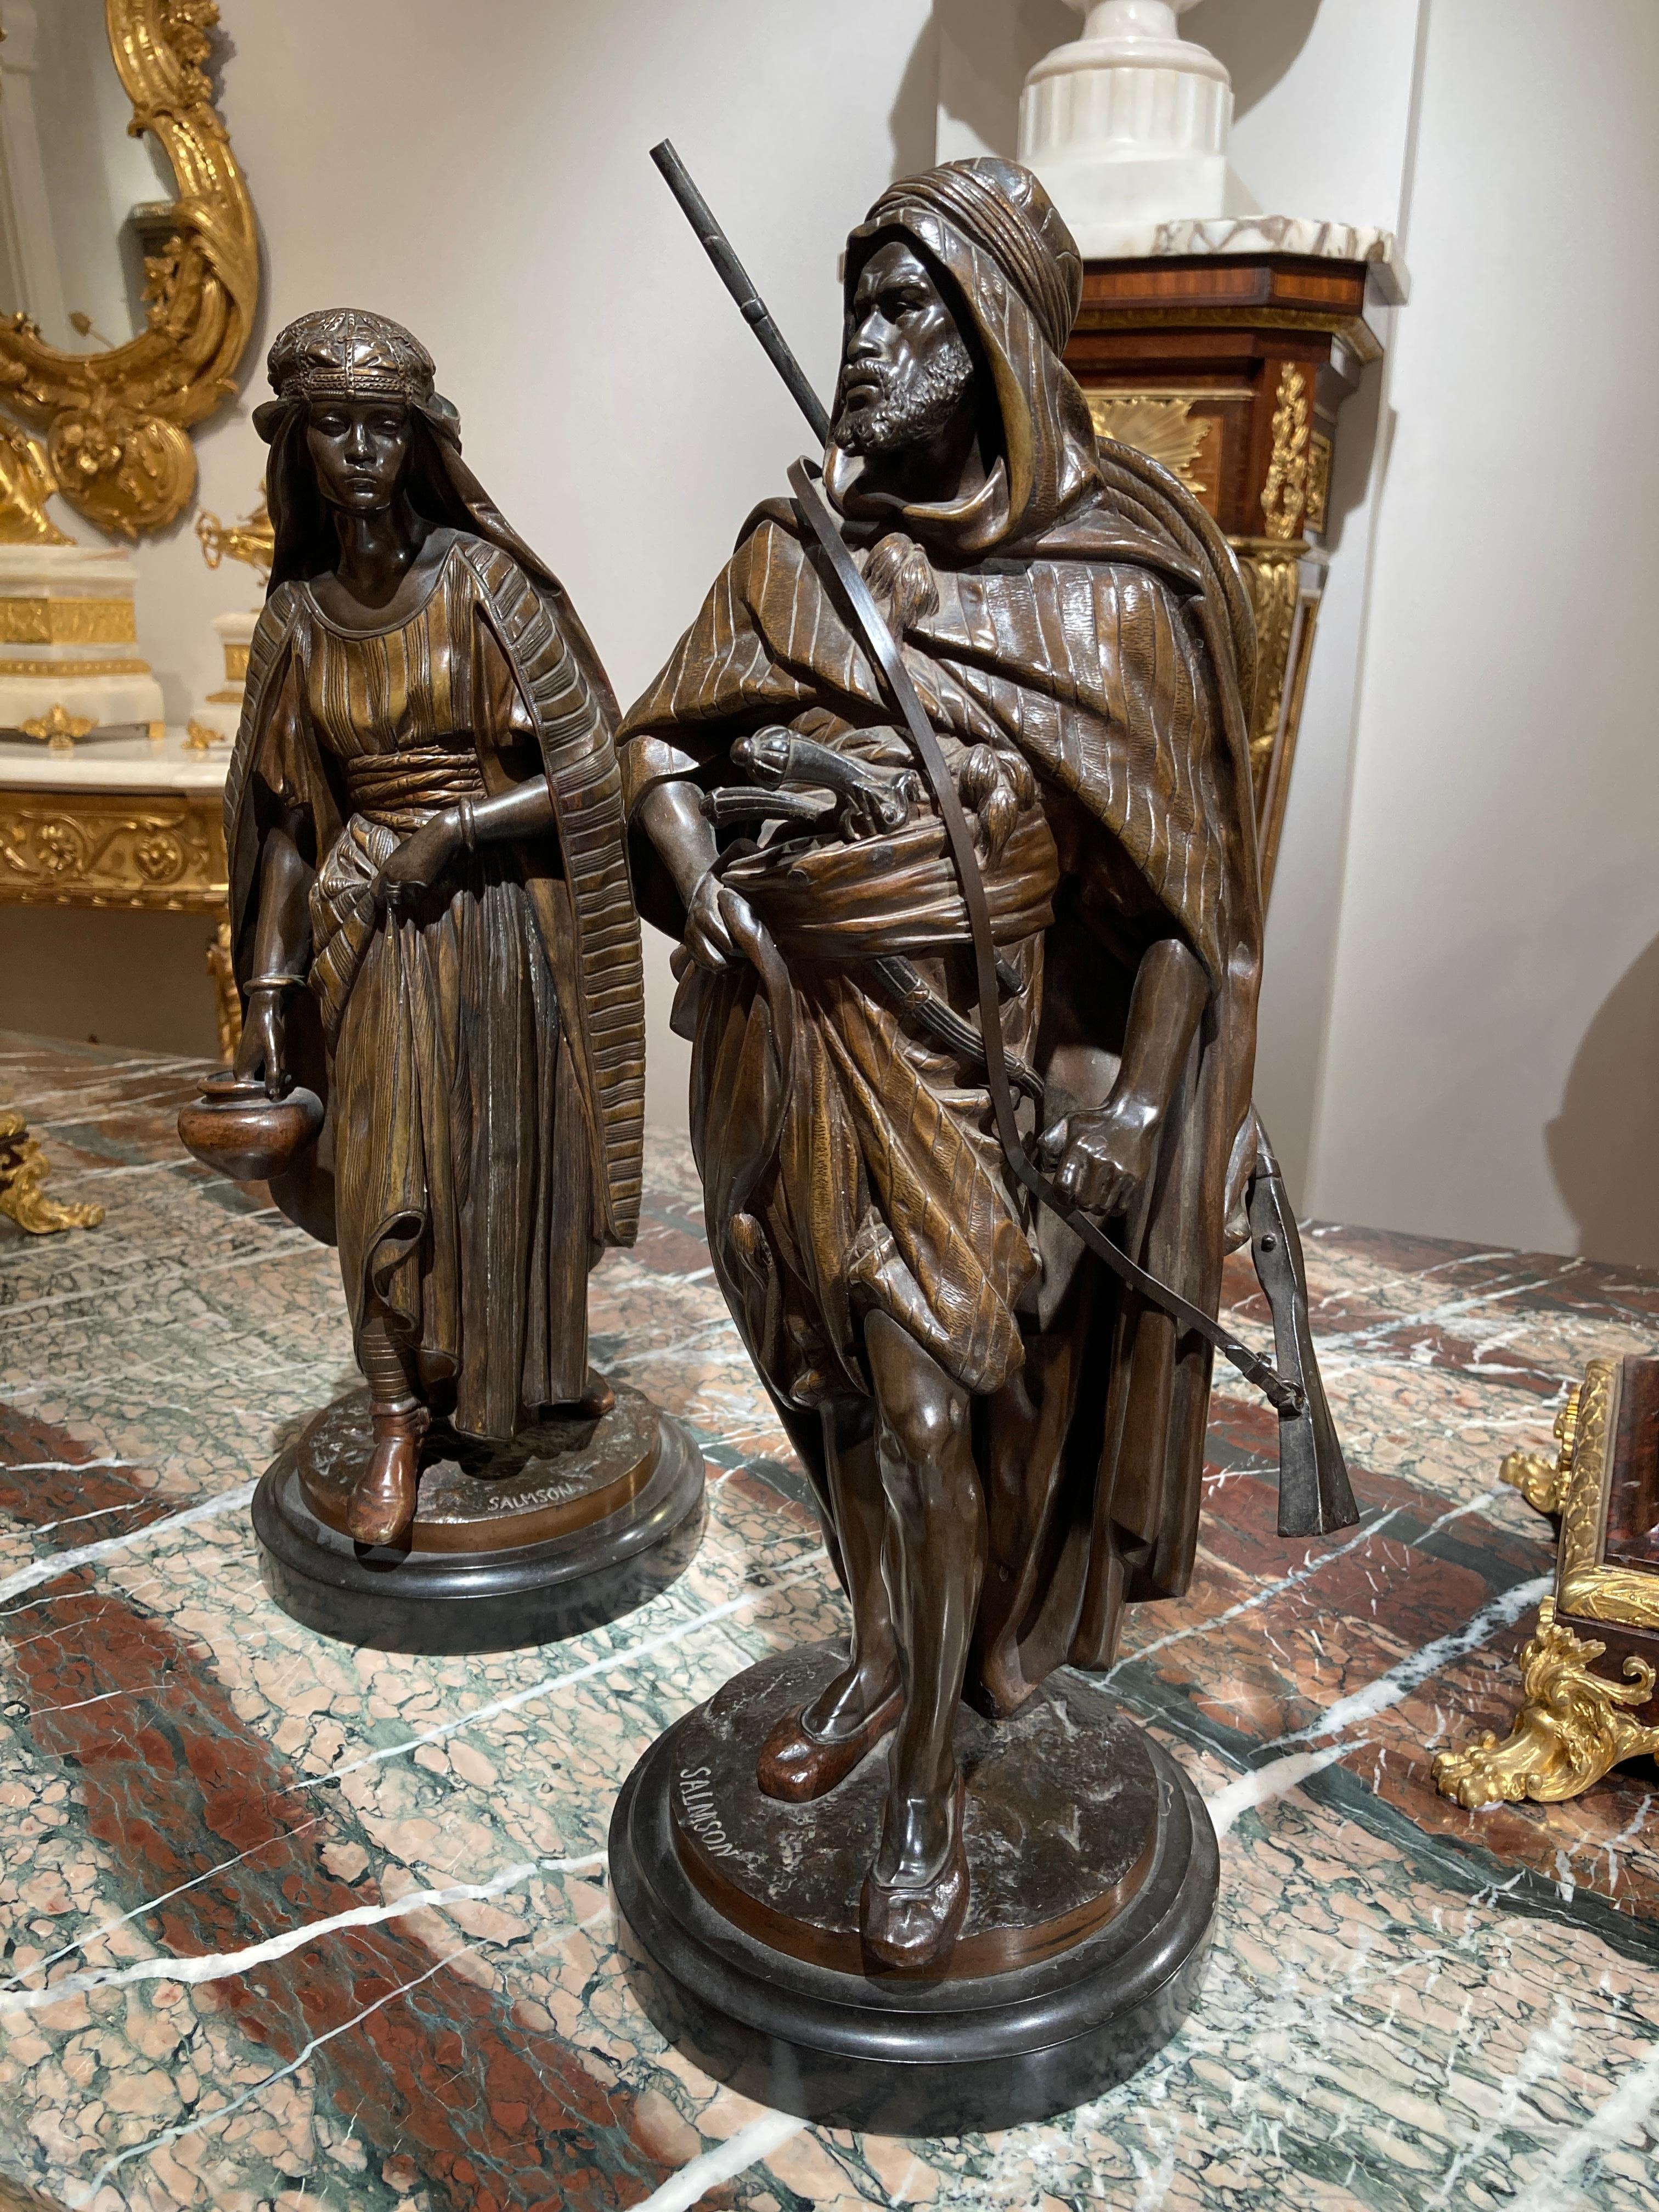 Pair of Figural Orientalist Bronzes by Jean Jules Salmson, 1823-1902 In Excellent Condition For Sale In London, GB